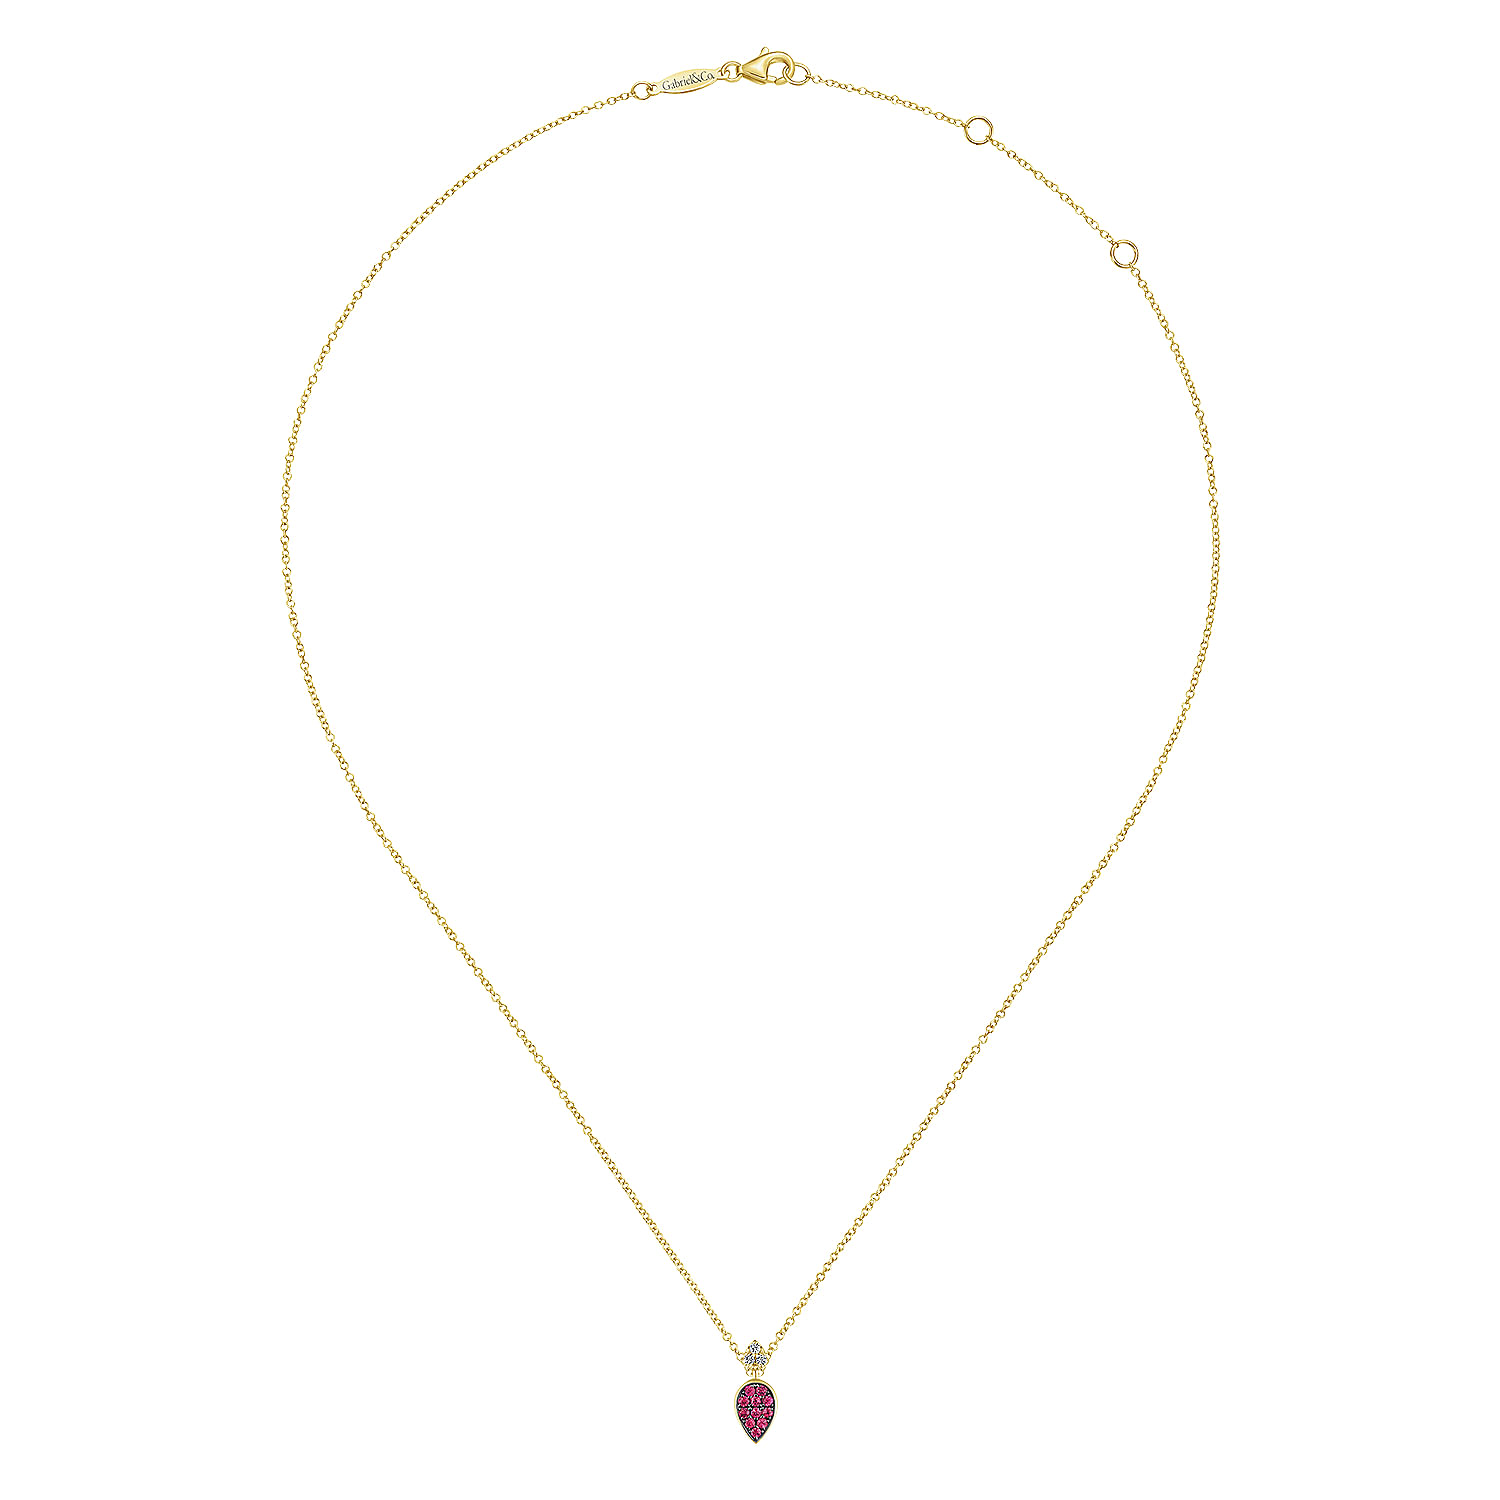 14K Yellow Gold Teardrop Pendant Necklace with Rubies and Diamonds